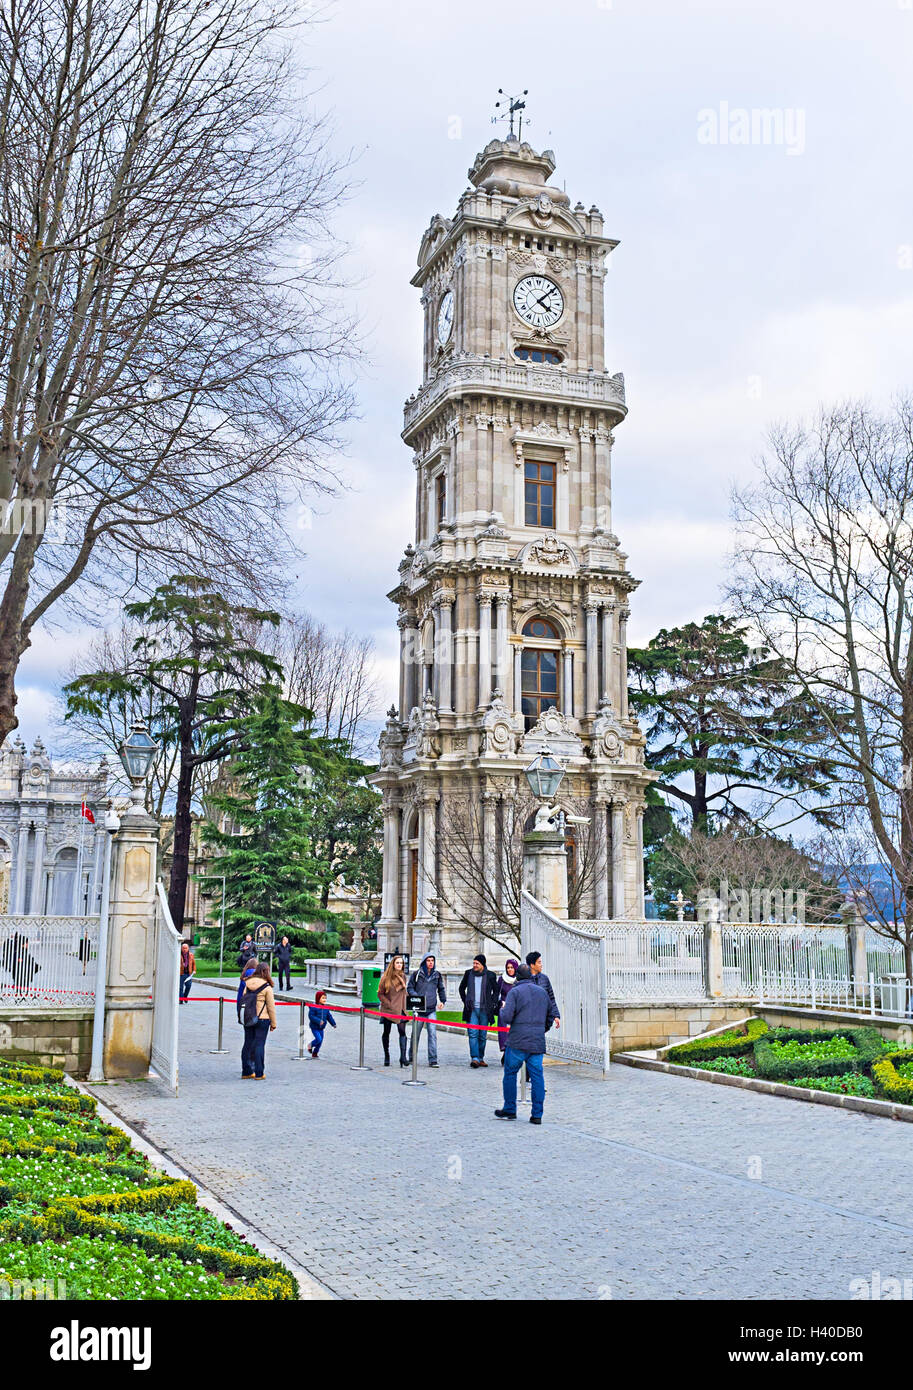 The beautiful ottoman neo-baroque clock tower of Dolmabahce Palace Stock Photo